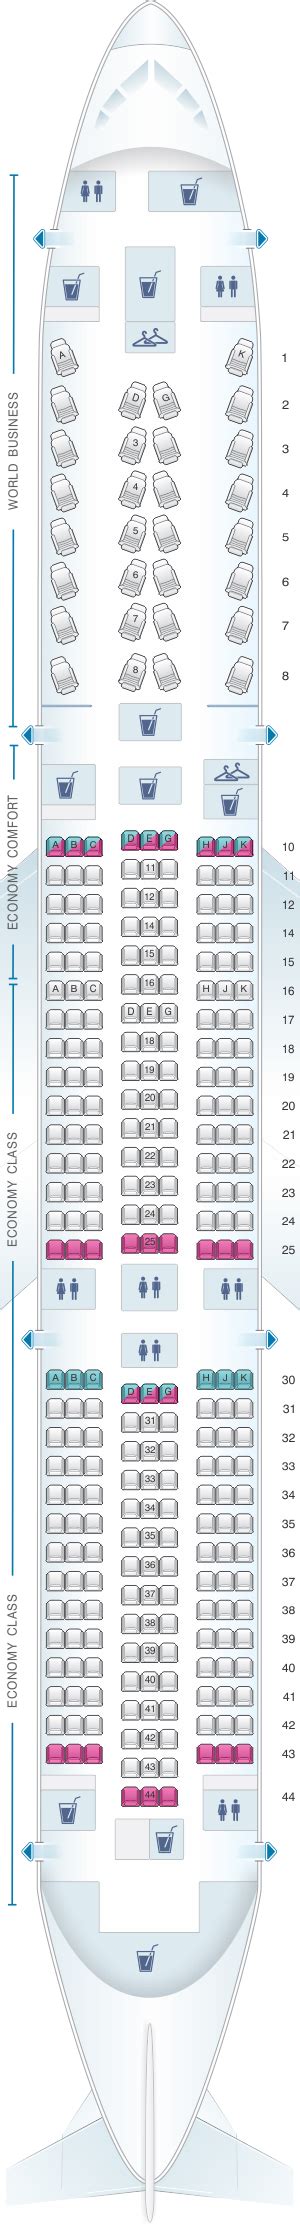 klm boeing 787 seating chart